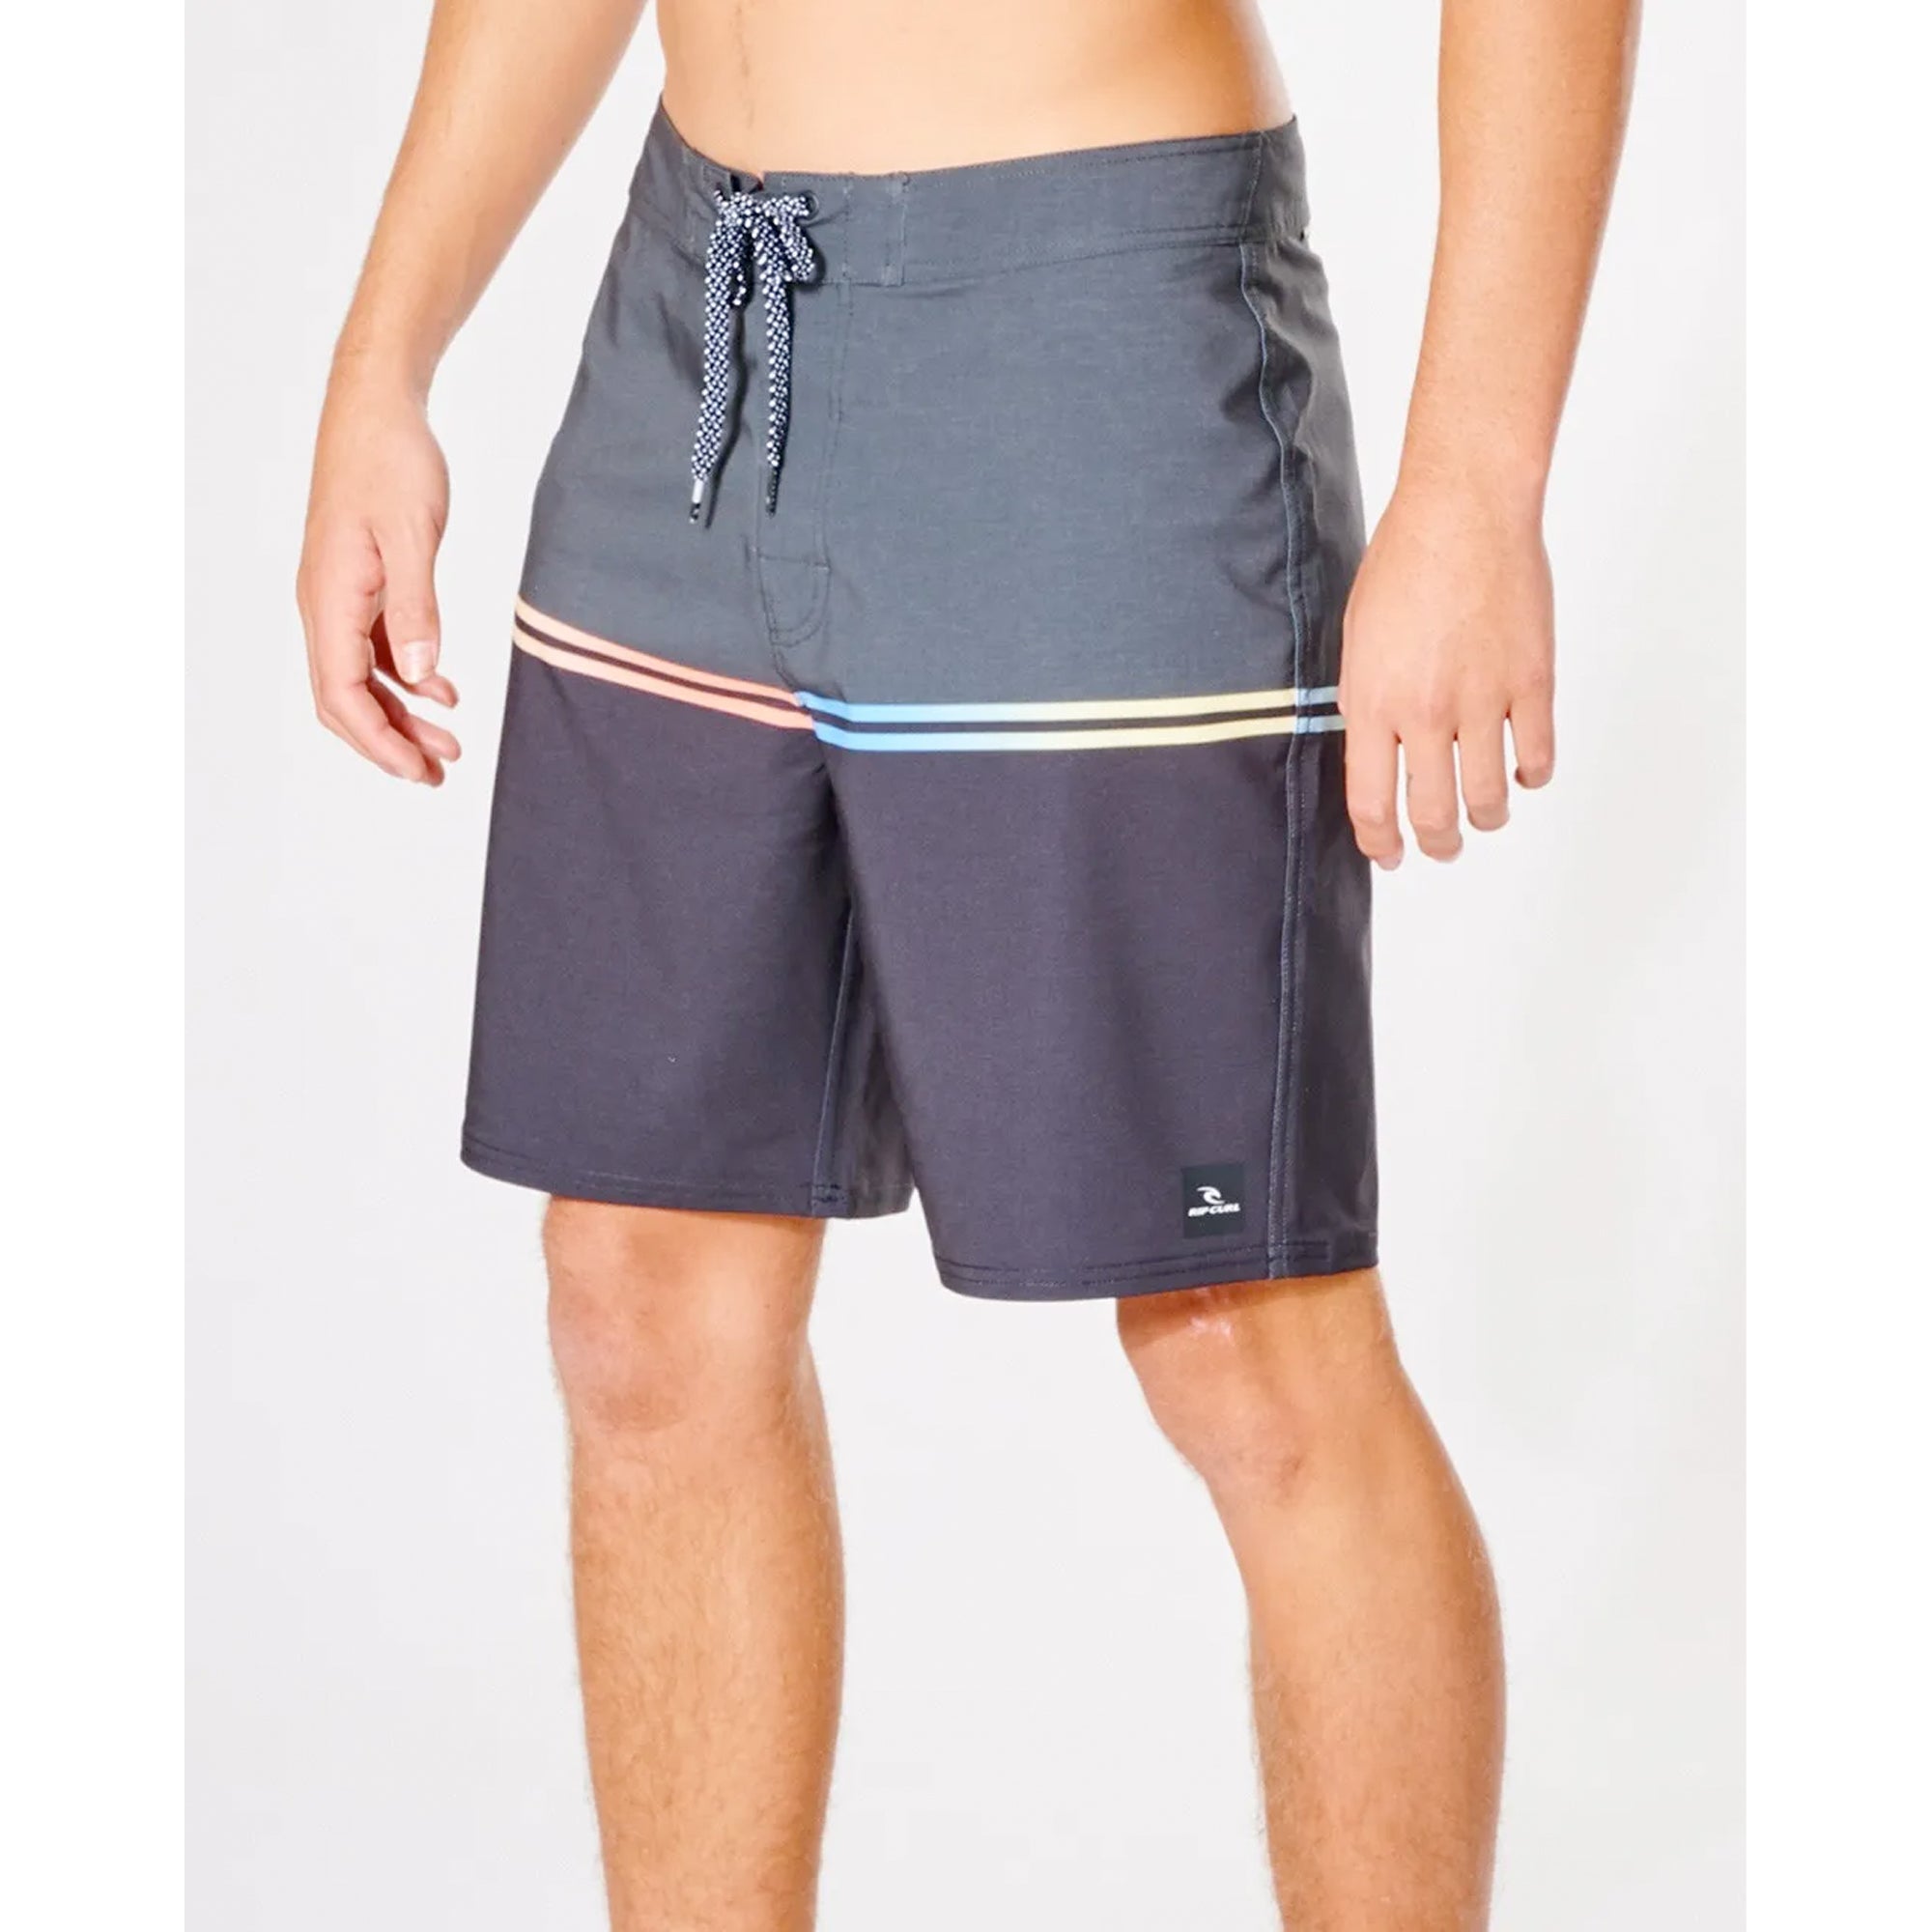 Rip Curl Mirage Combined 19" 2.0 Men's Boardshorts